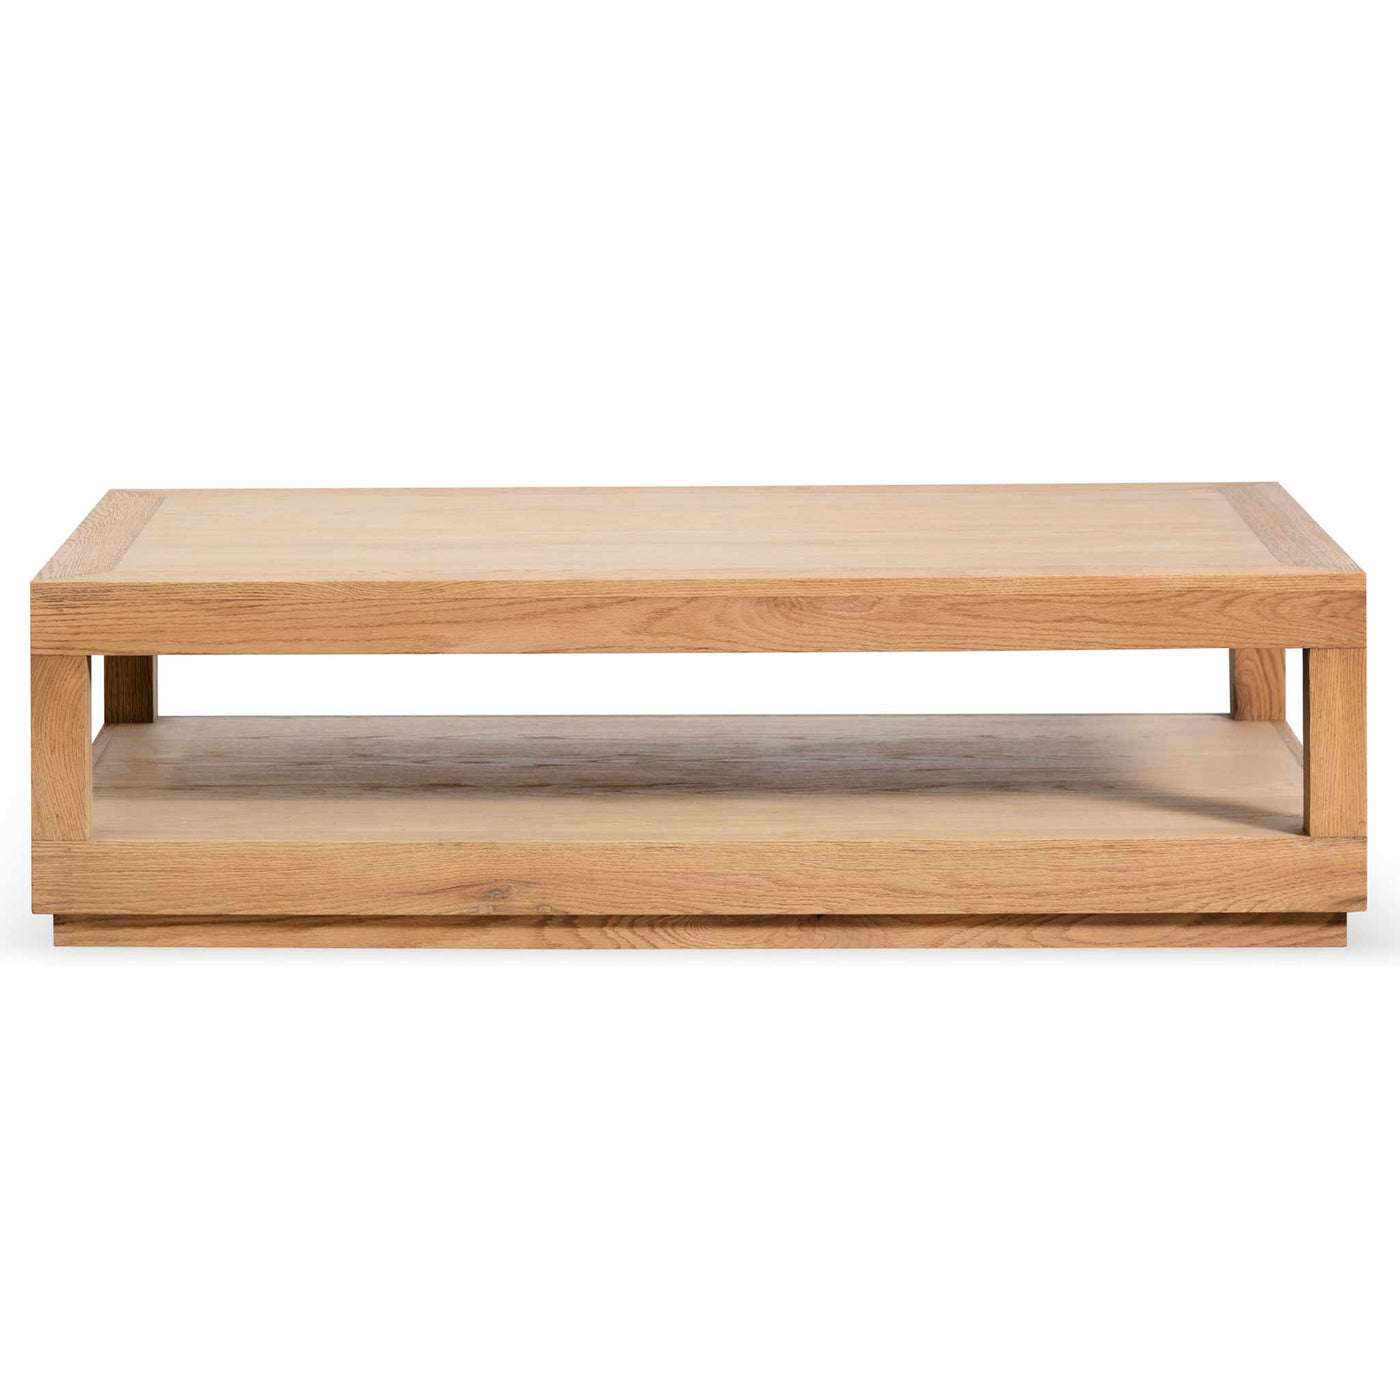 1.4m Wooden Coffee Table - Distress Natural